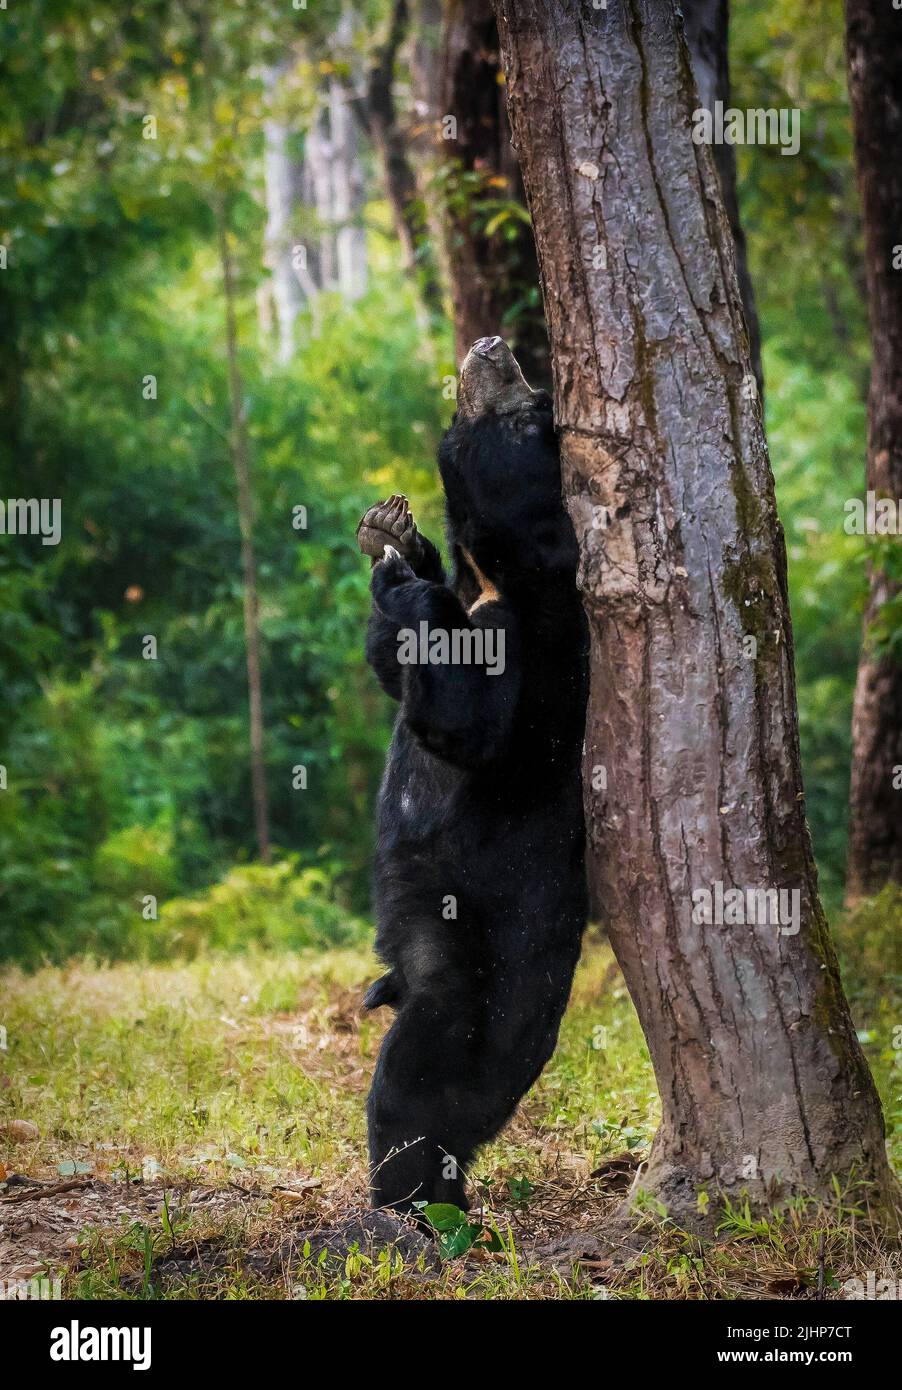 The sloth bear stretches out for a good scratch. India: THESE PICTURES look like they are taken straight out of Jungle Book as a bear itches its back Stock Photo